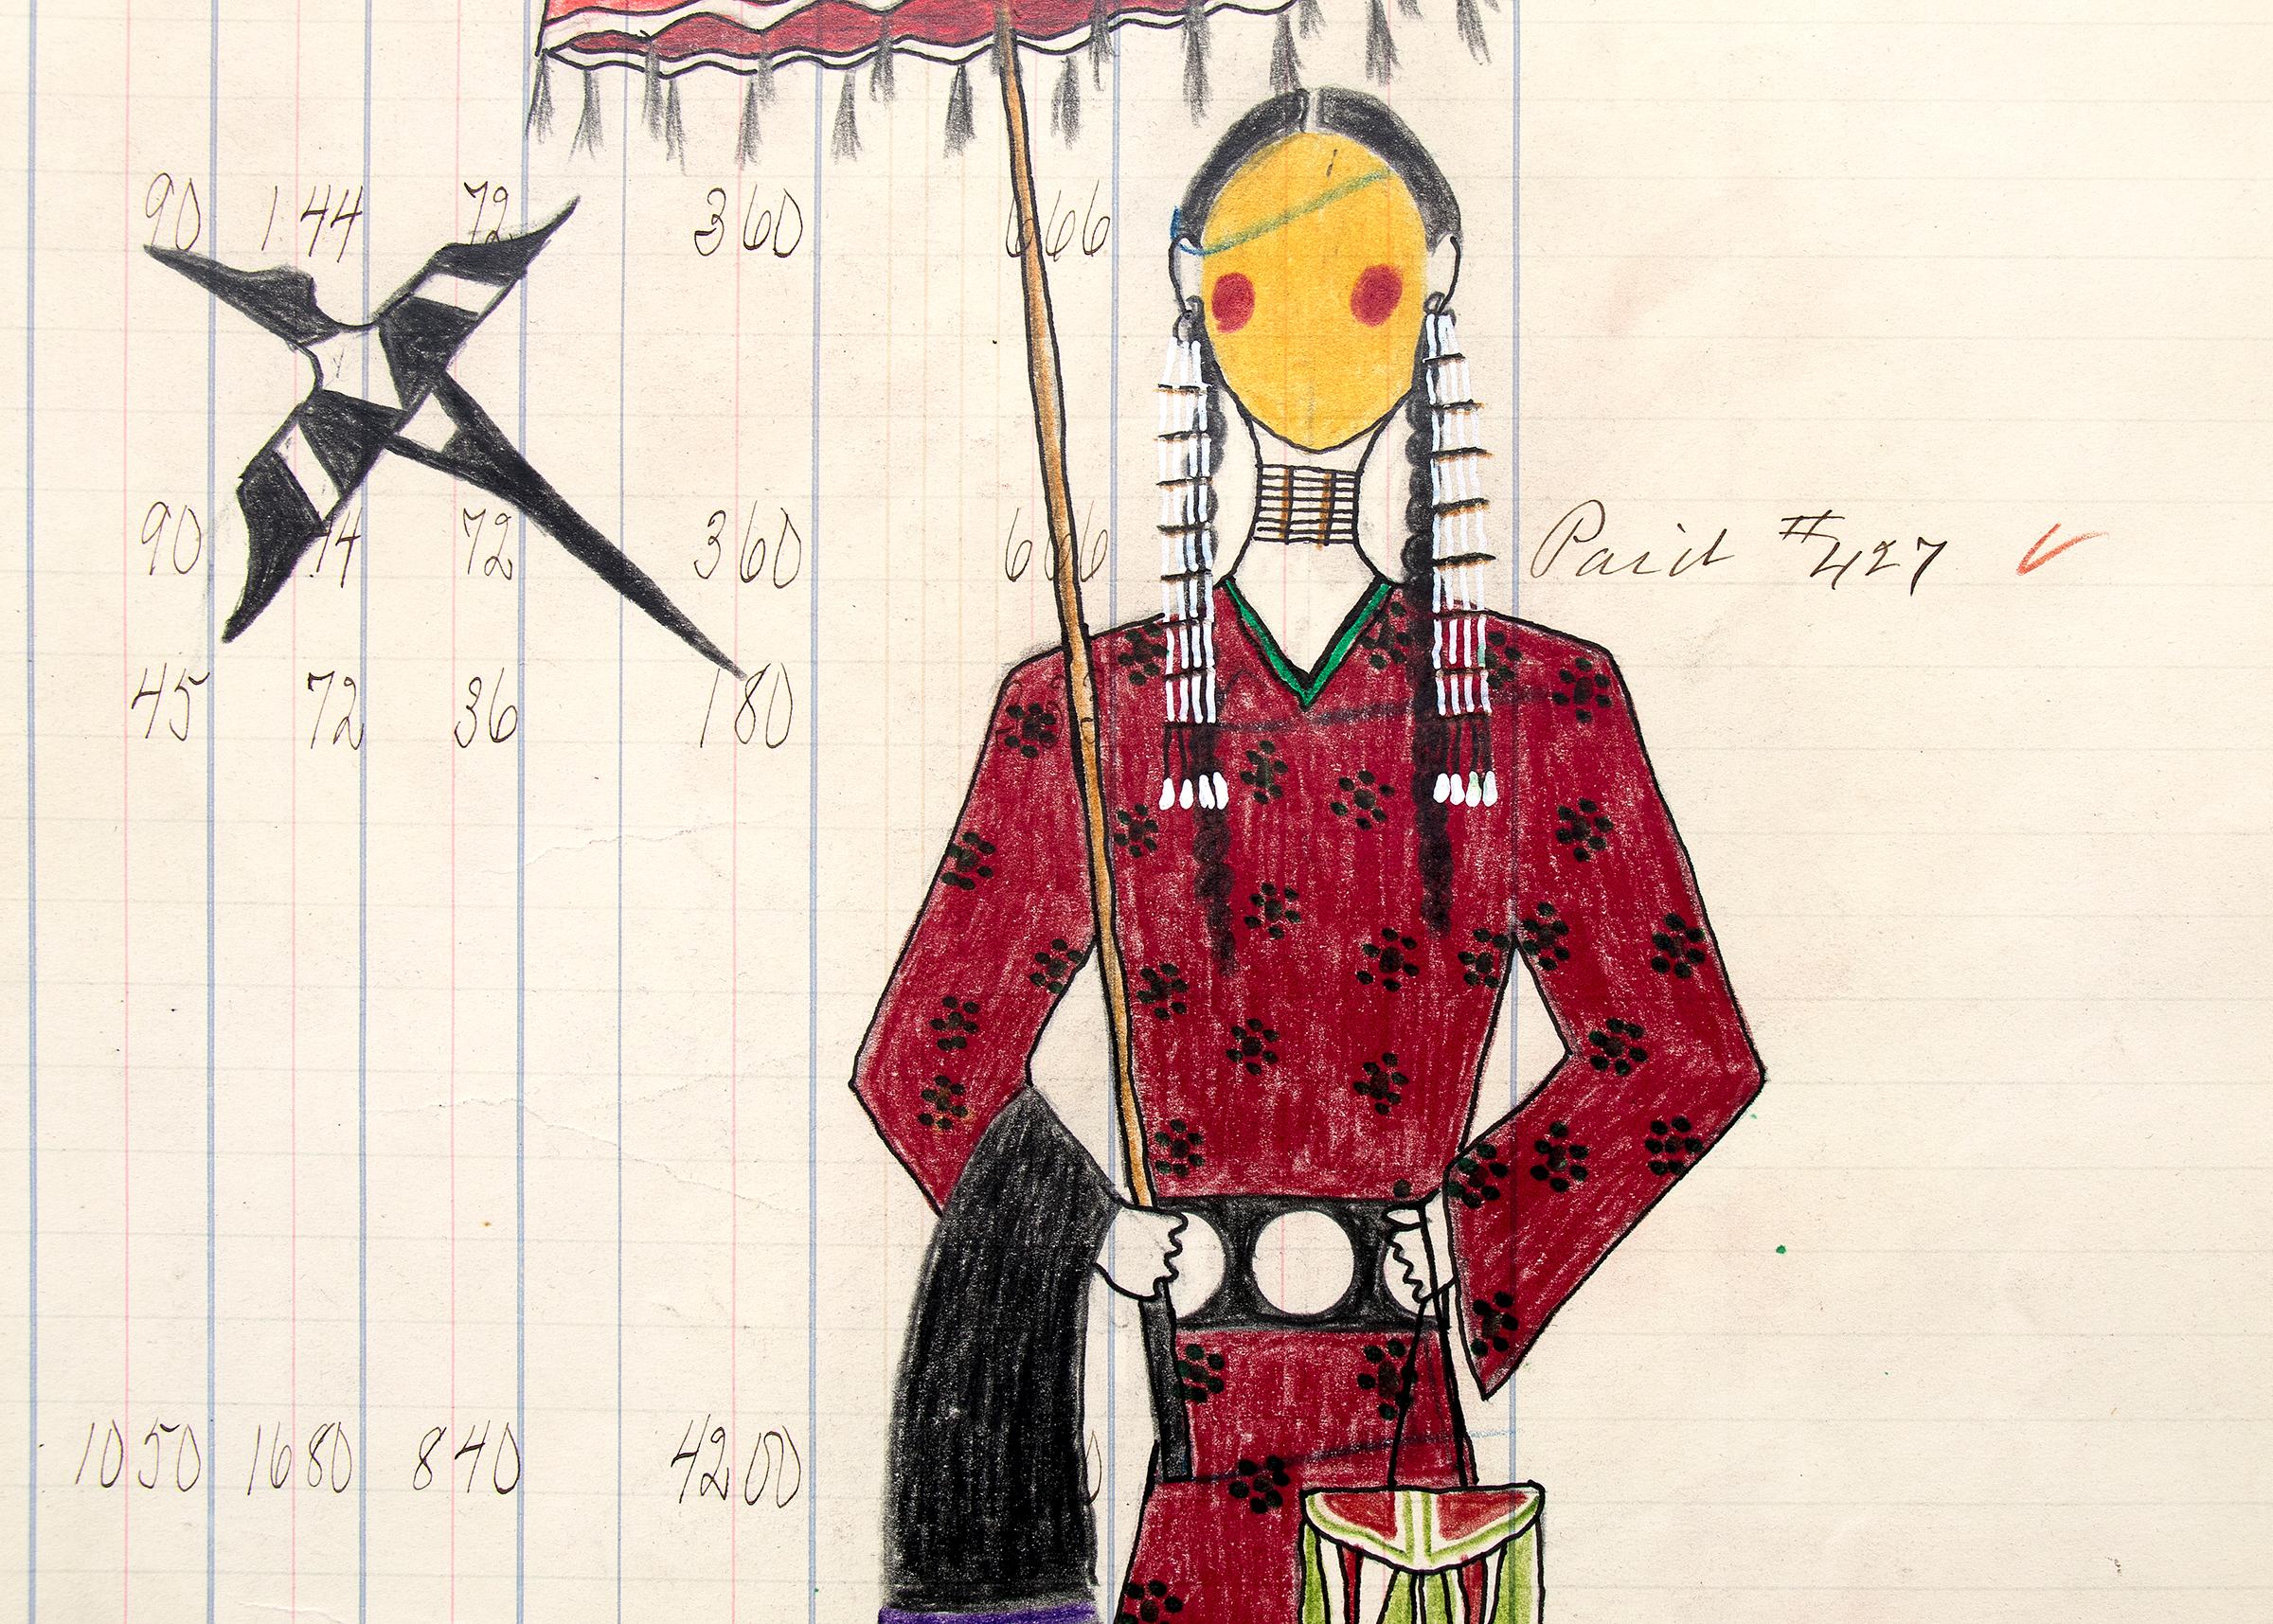 Painted Untitled 'Cheyenne Woman with Parfleche and Umbrella', Ledger Art Drawing